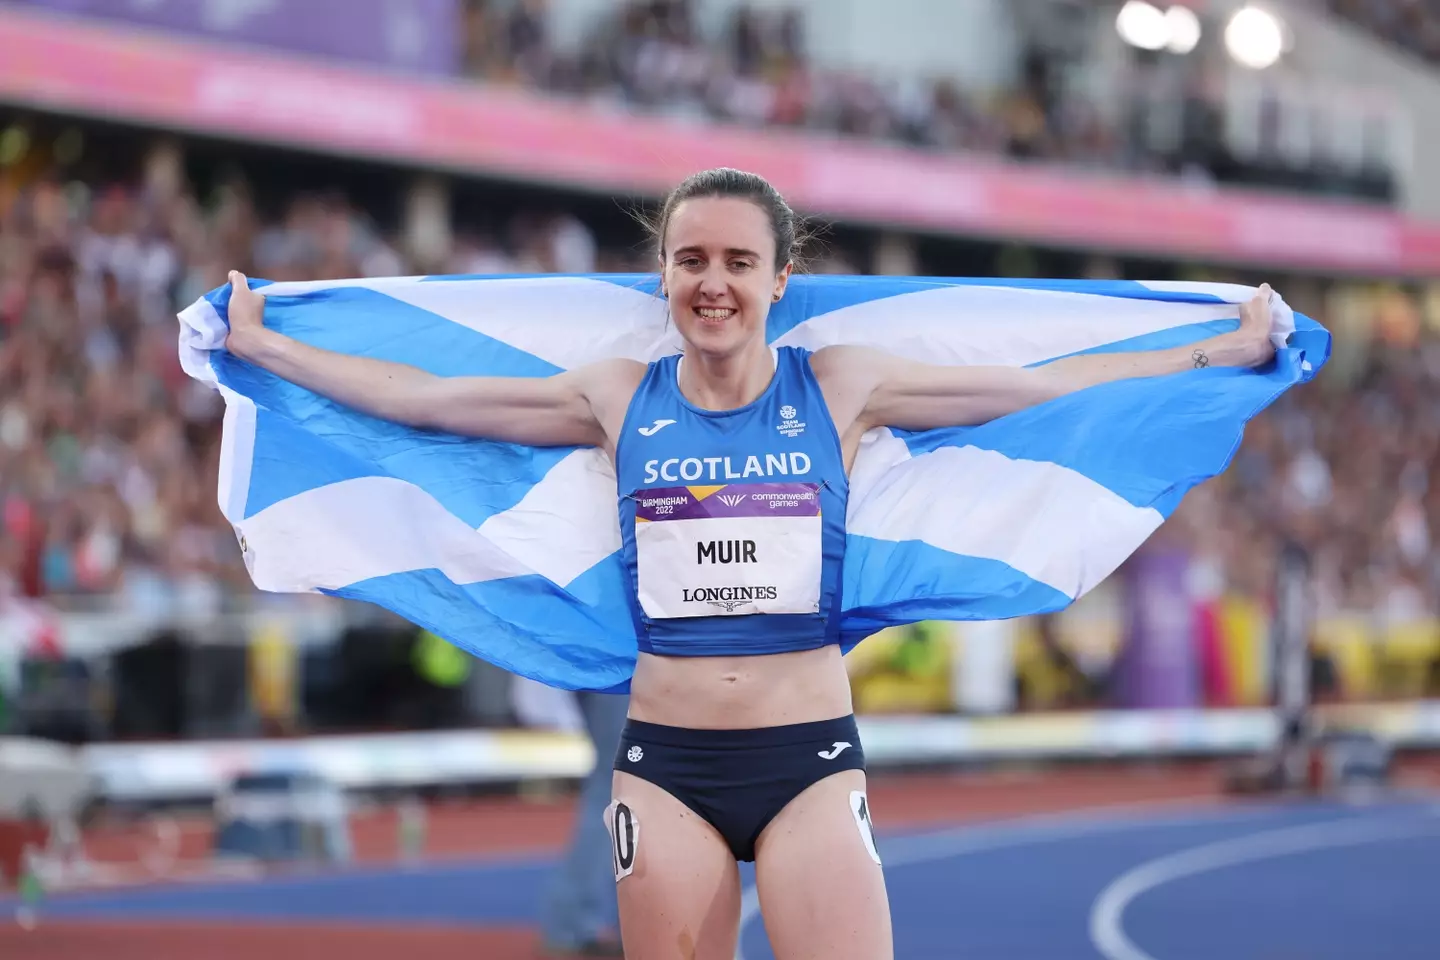 Scotland's Laura Muir secured victory after winning the 1500 metres.